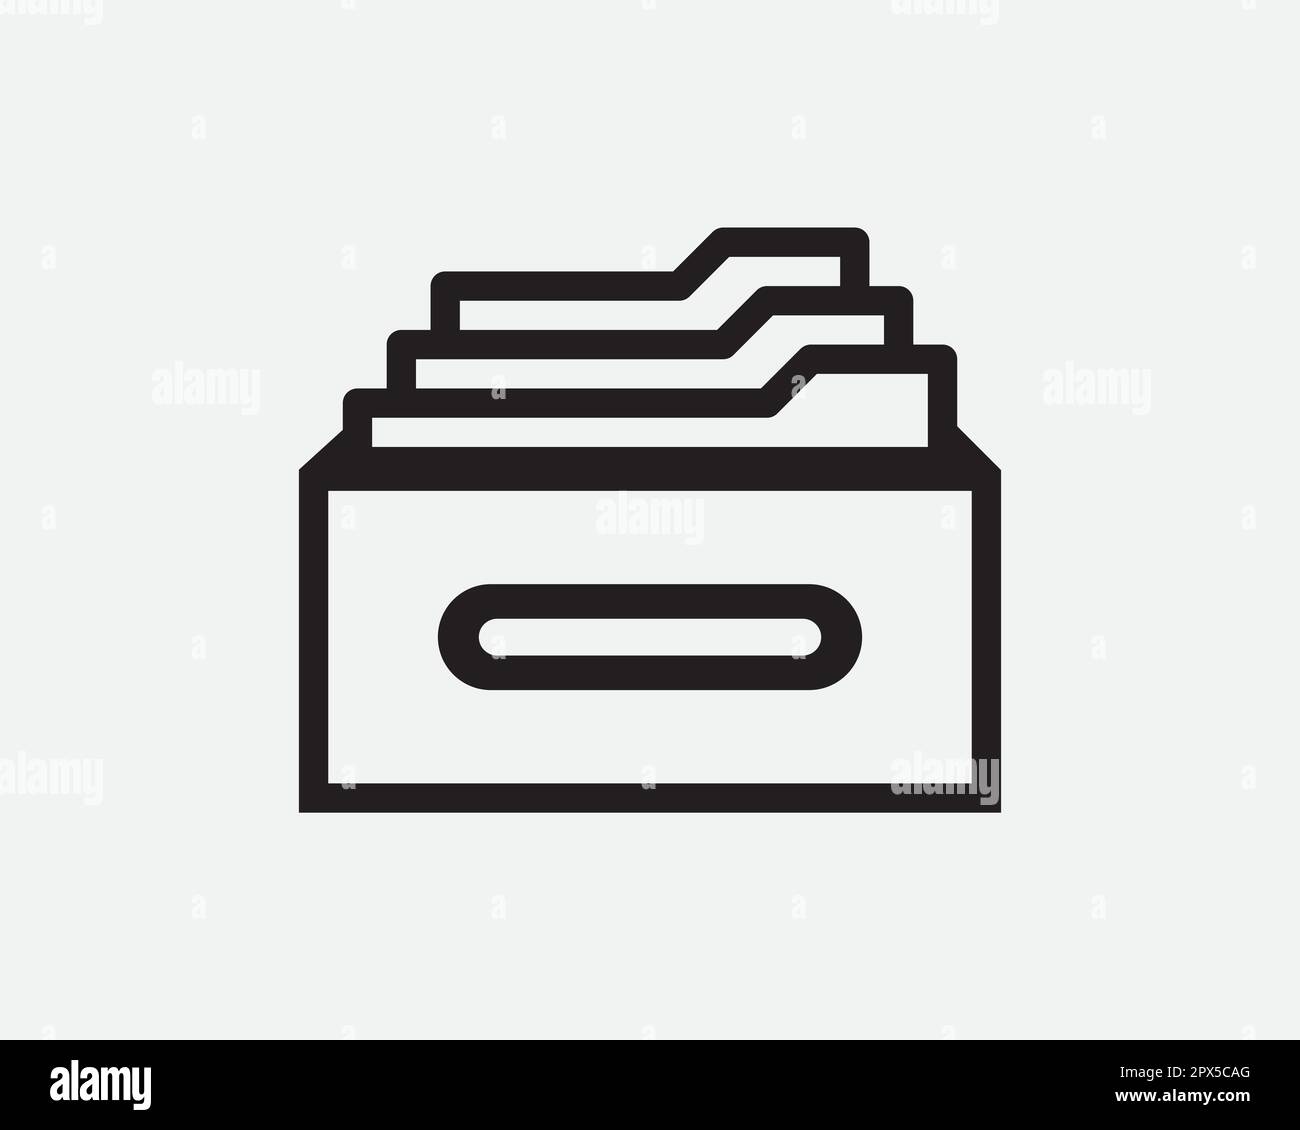 Document Folder Drawer Line Icon. File Archive Paper Storage Cabinet Symbol. Office Business Organize Sign Linear Vector Graphic Illustration Clipart Stock Vector